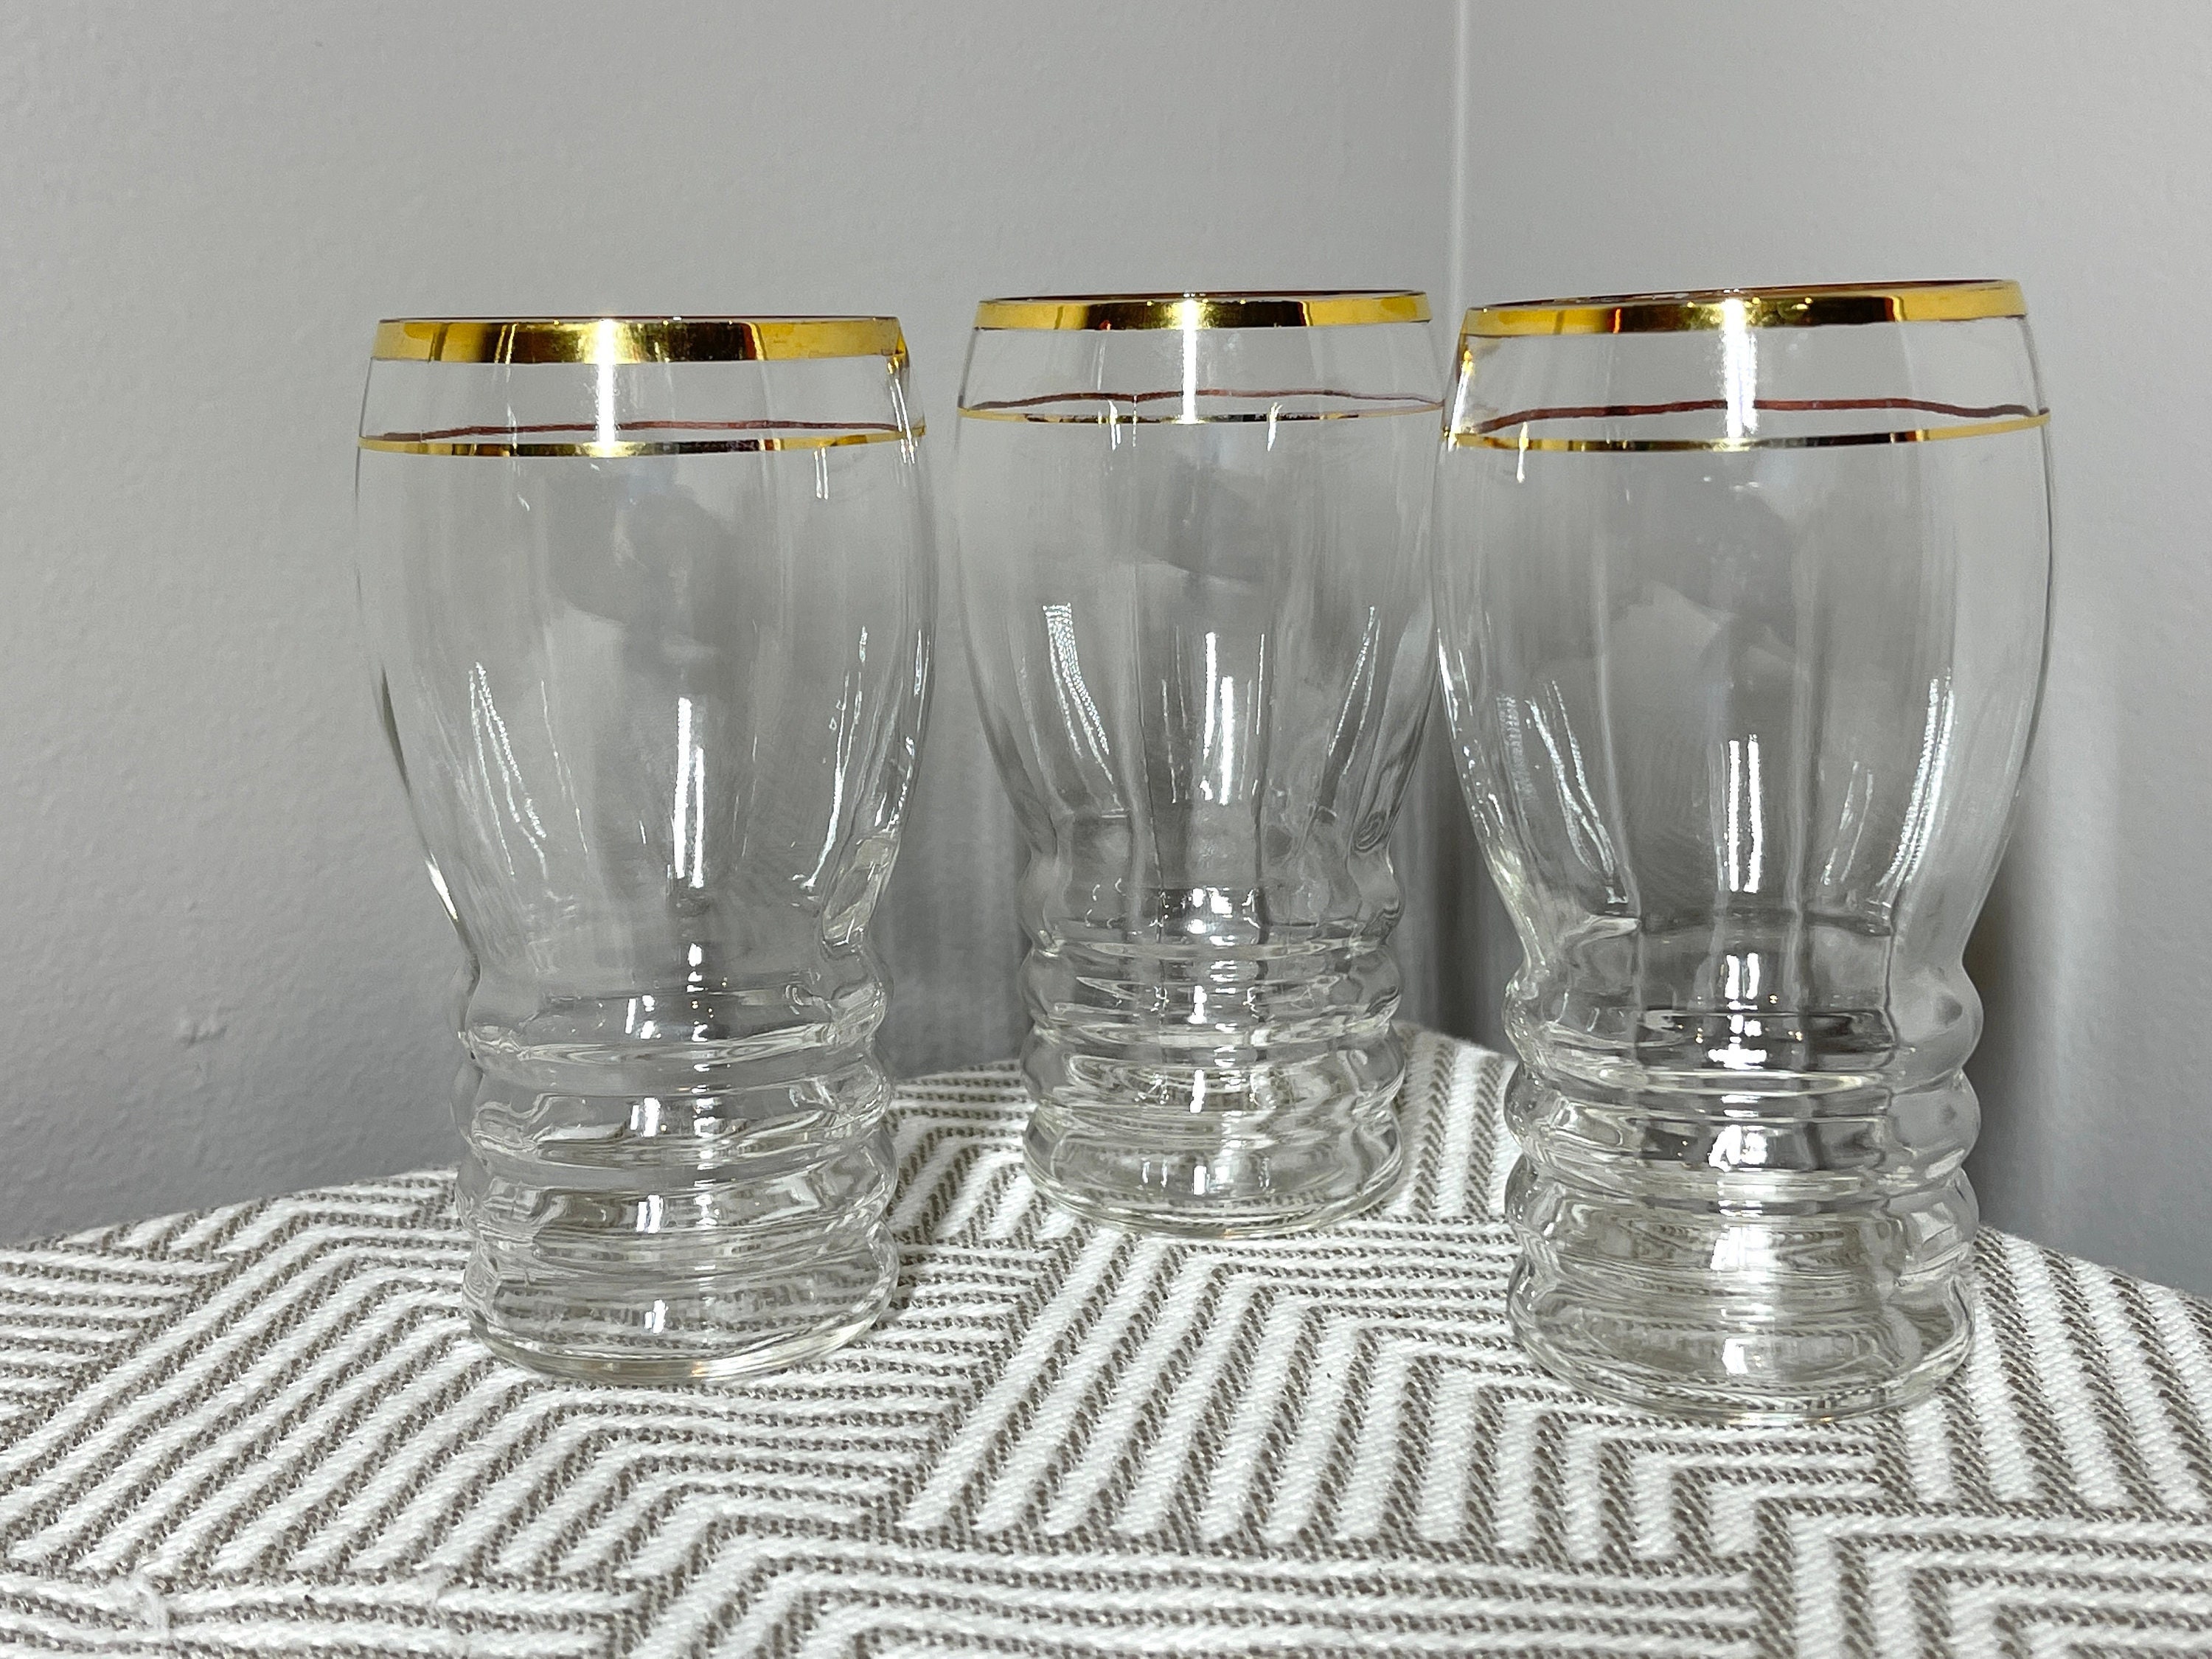 KEMORELA Ribbed Glassware Drinking Glasses - Set of 8 Vintage Cute Glass  Cups - Ripple Rluted Aesthe…See more KEMORELA Ribbed Glassware Drinking